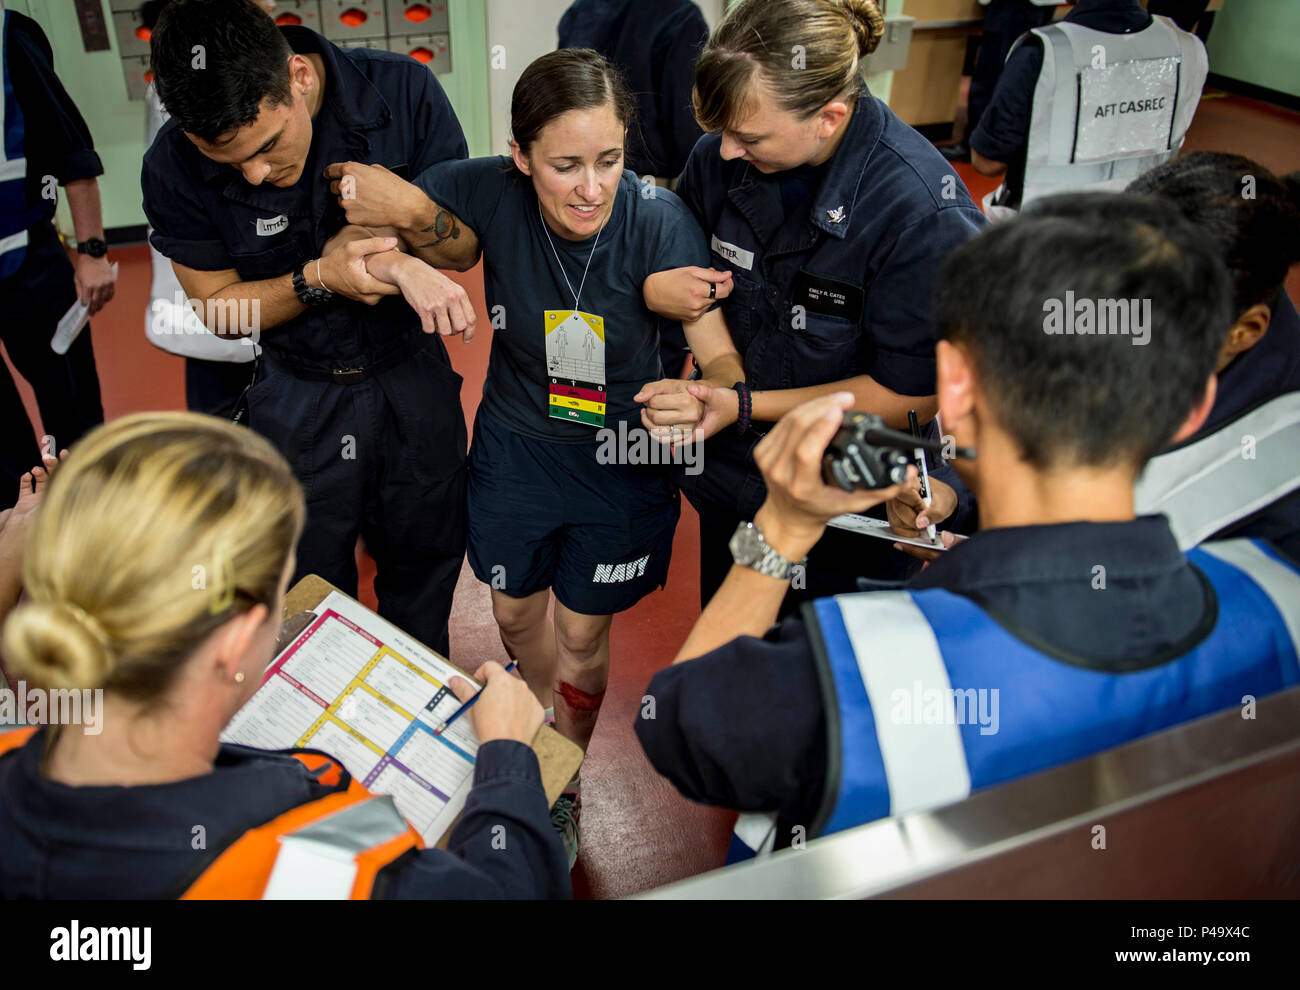 160624-N-QW941-128 PHILIPPINES SEA (June 24, 2016) Lt. Jennifer Knapp (center), a native of Agua Dulce, California, simulates being injured during a mass casualty drill aboard hospital ship USNS Mercy (T-AH 19). Deployed in support of Pacific Partnership 2016, medical, engineering and various other personnel embarked aboard Mercy are working side-by-side with partner nation counterparts, exchanging ideas, building best practices and relationships to ensure preparedness should disaster strike. (U.S. Navy photo by Mass Communication Specialist 3rd Class Trevor Kohlrus/Released) Stock Photo